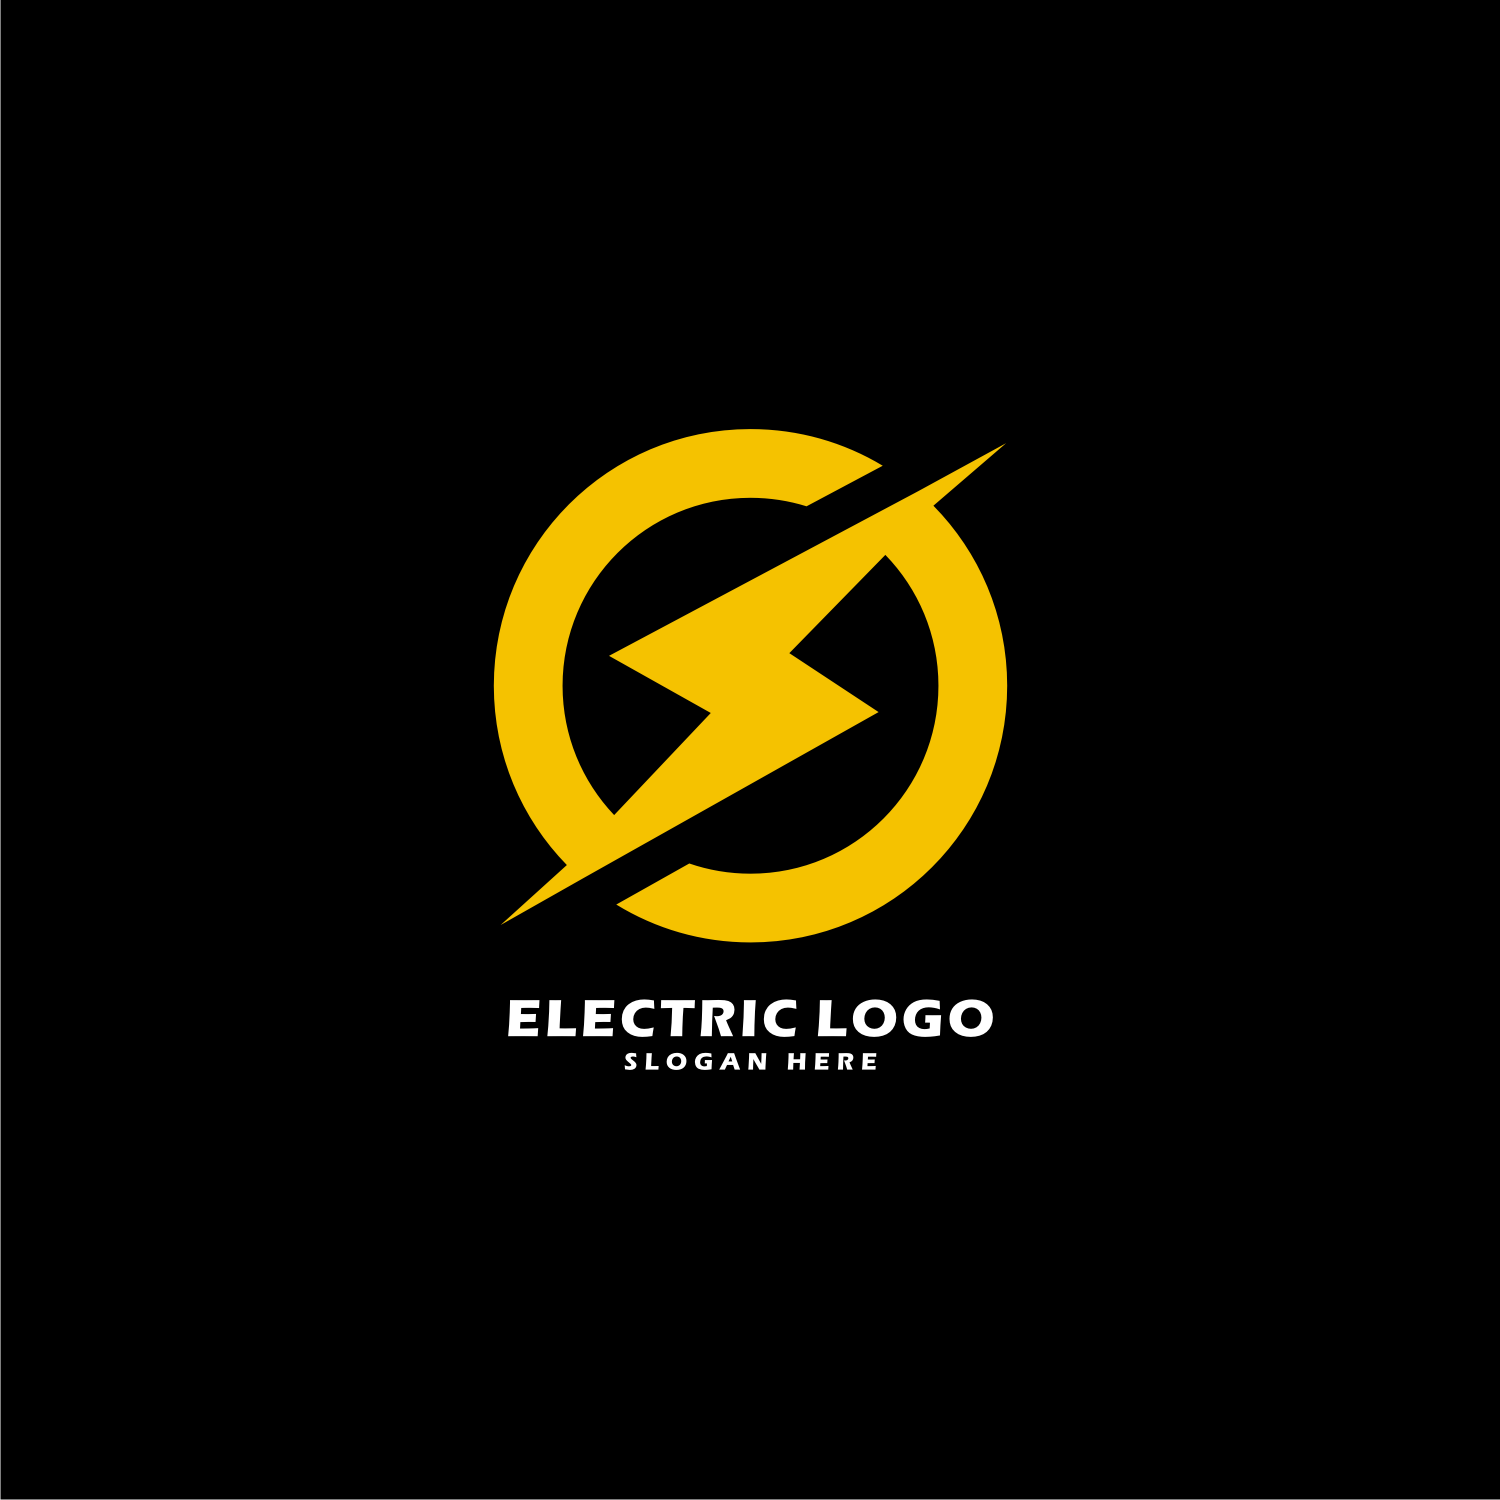 Electric Power Vector Logo Design Element cover image.